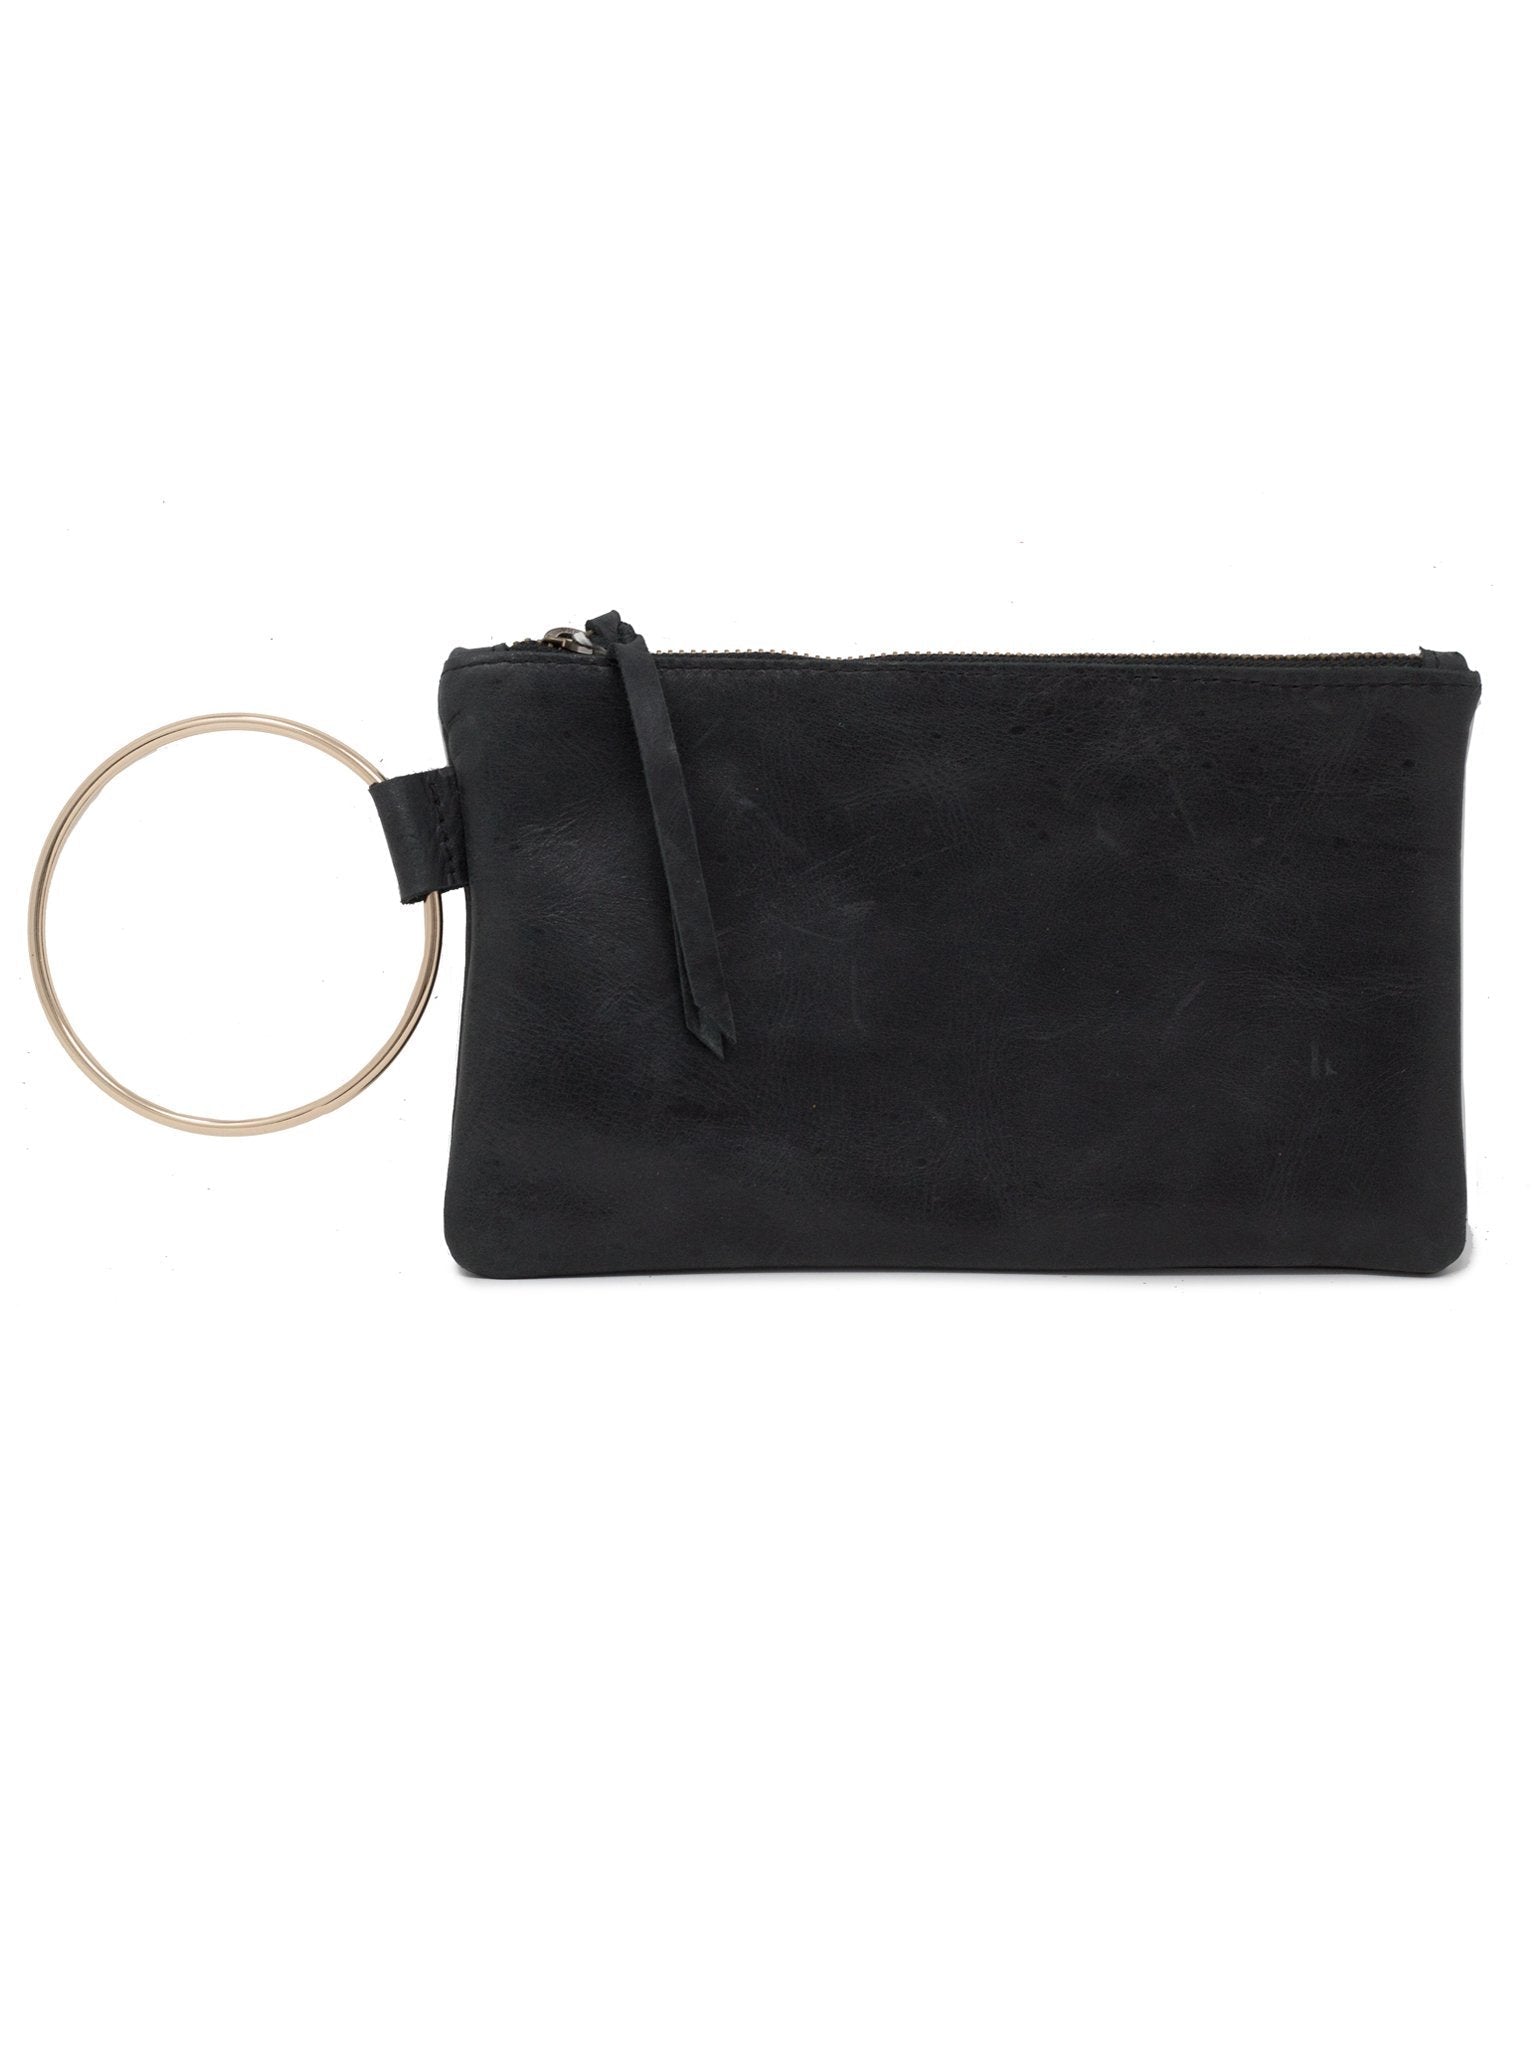 ABLE - The Fozi Wristlet